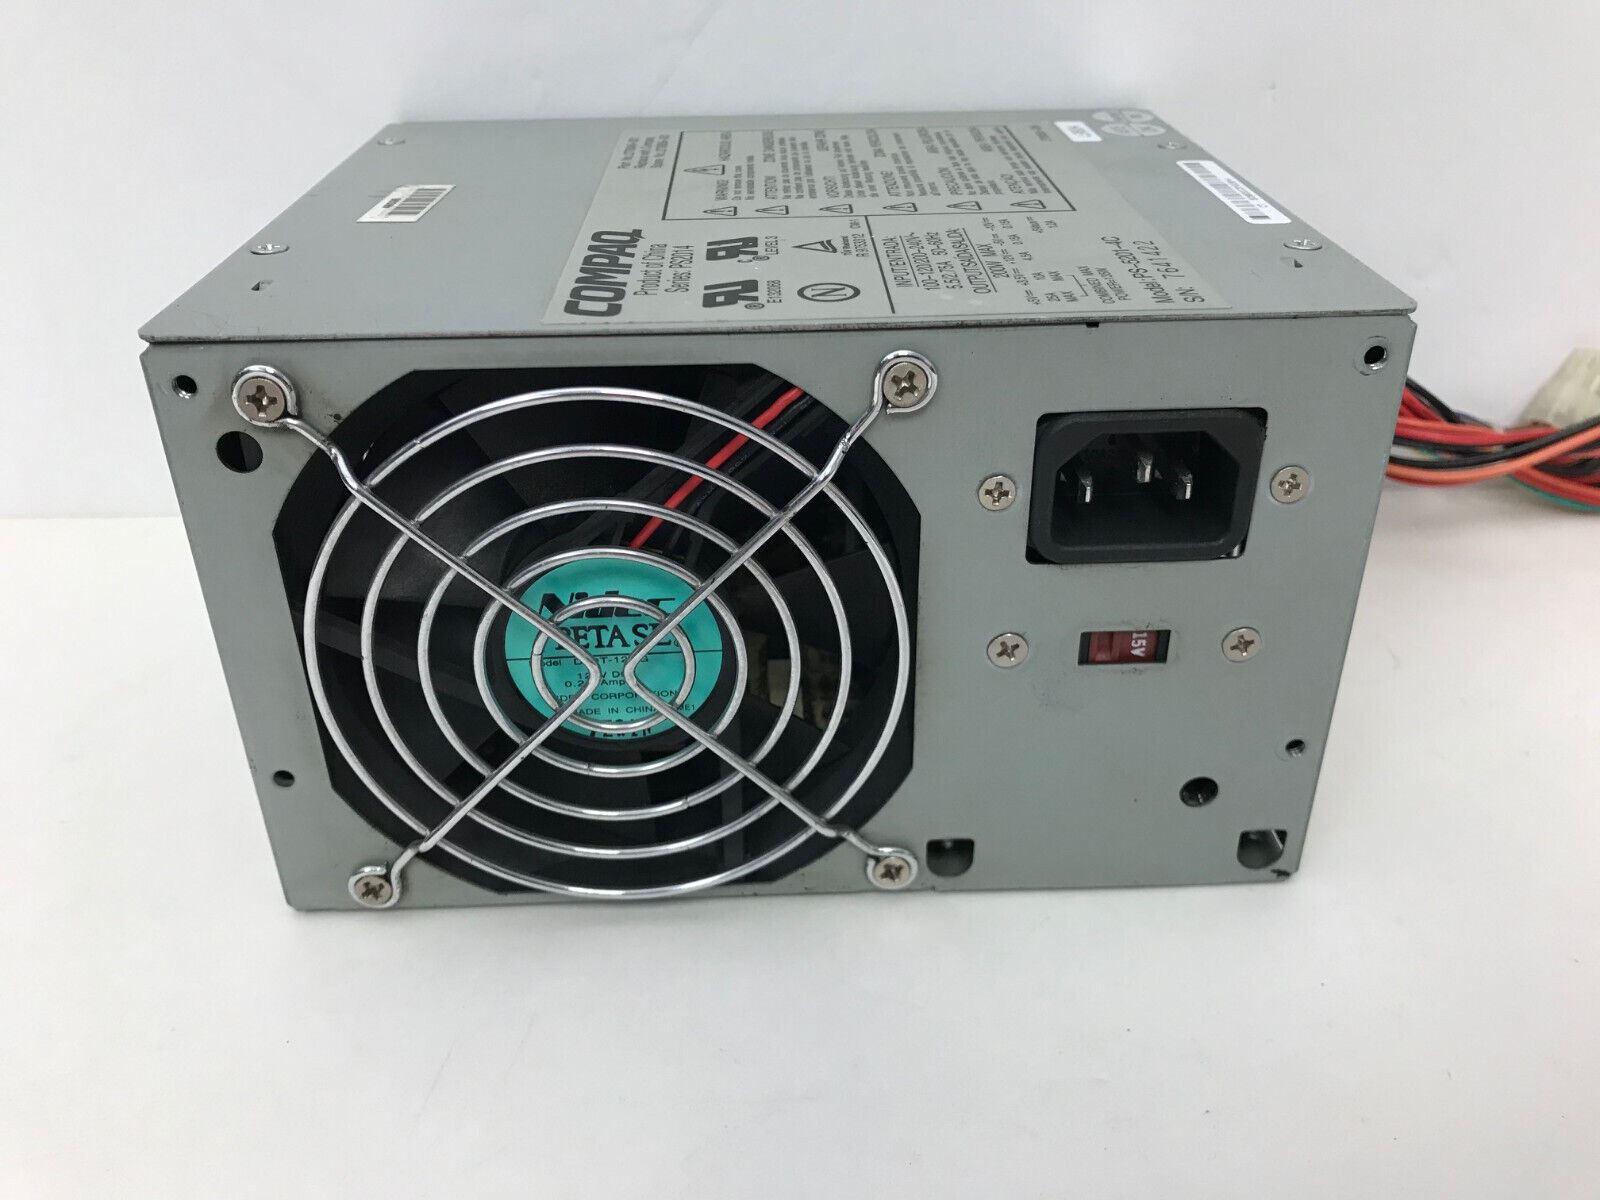 270646 001 PS2014 PS 5201 4C 270656 001 switching power supply 110 240vac input 45 66hz 4 dc outputs 200 watts